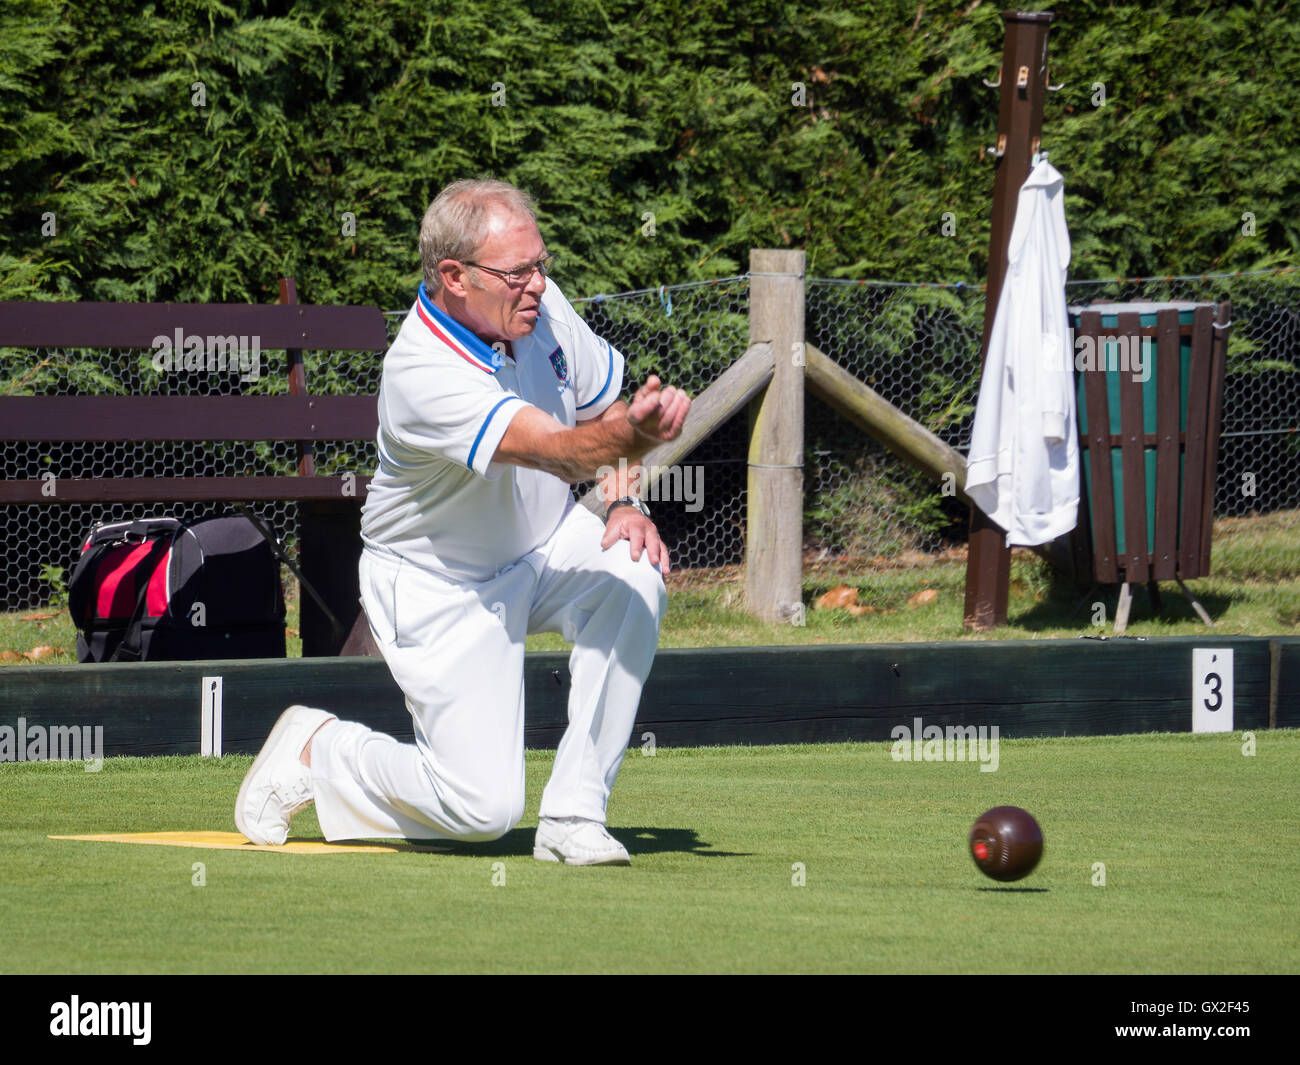 ISLE OF THORNS, SUSSEX/UK - SEPTEMBER 11 : Lawn Bowls Match at Isle of Thorns Chelwood Gate in Sussex on September 11, 2016. Unidentified man Stock Photo